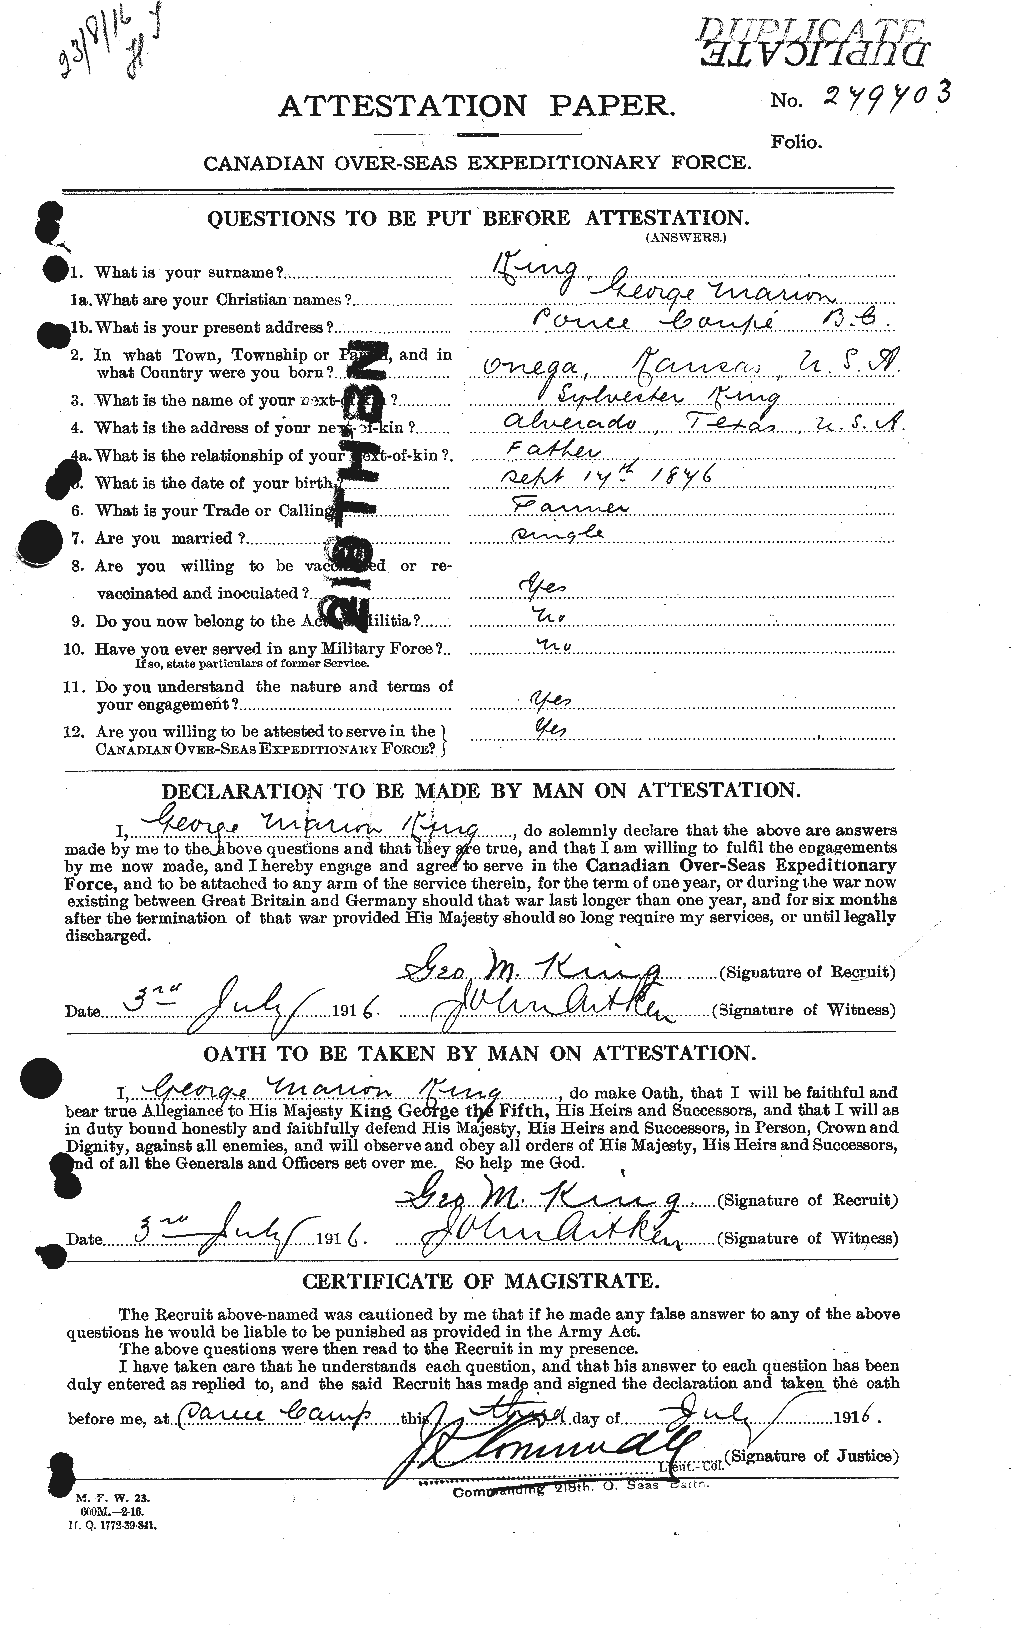 Personnel Records of the First World War - CEF 434380a